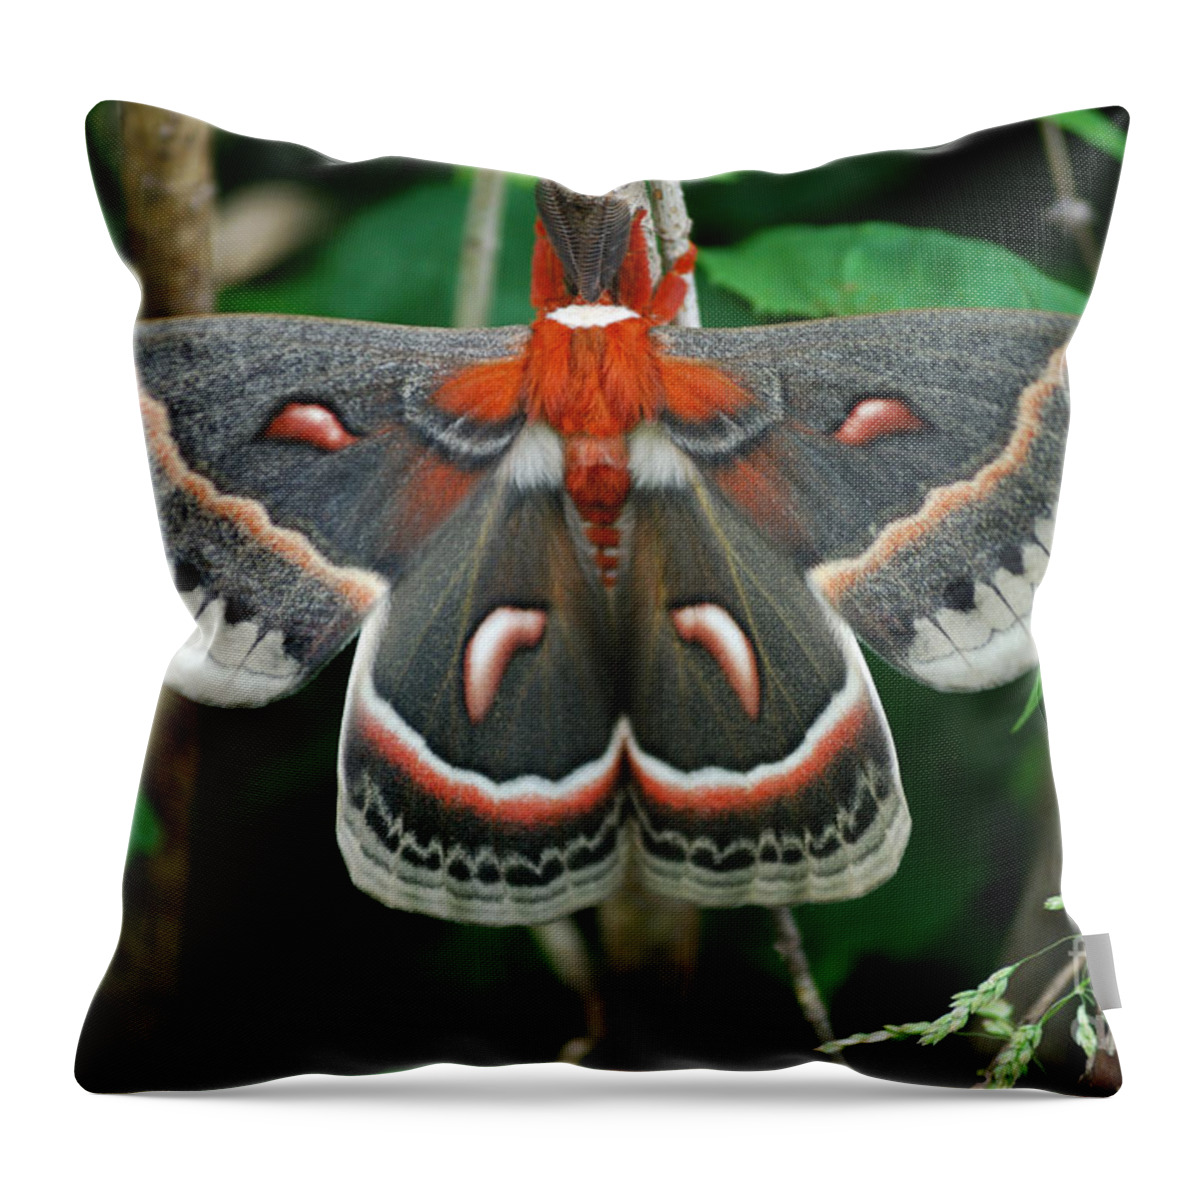 Cecropia Moth Throw Pillow featuring the photograph Emergence by Randy Bodkins